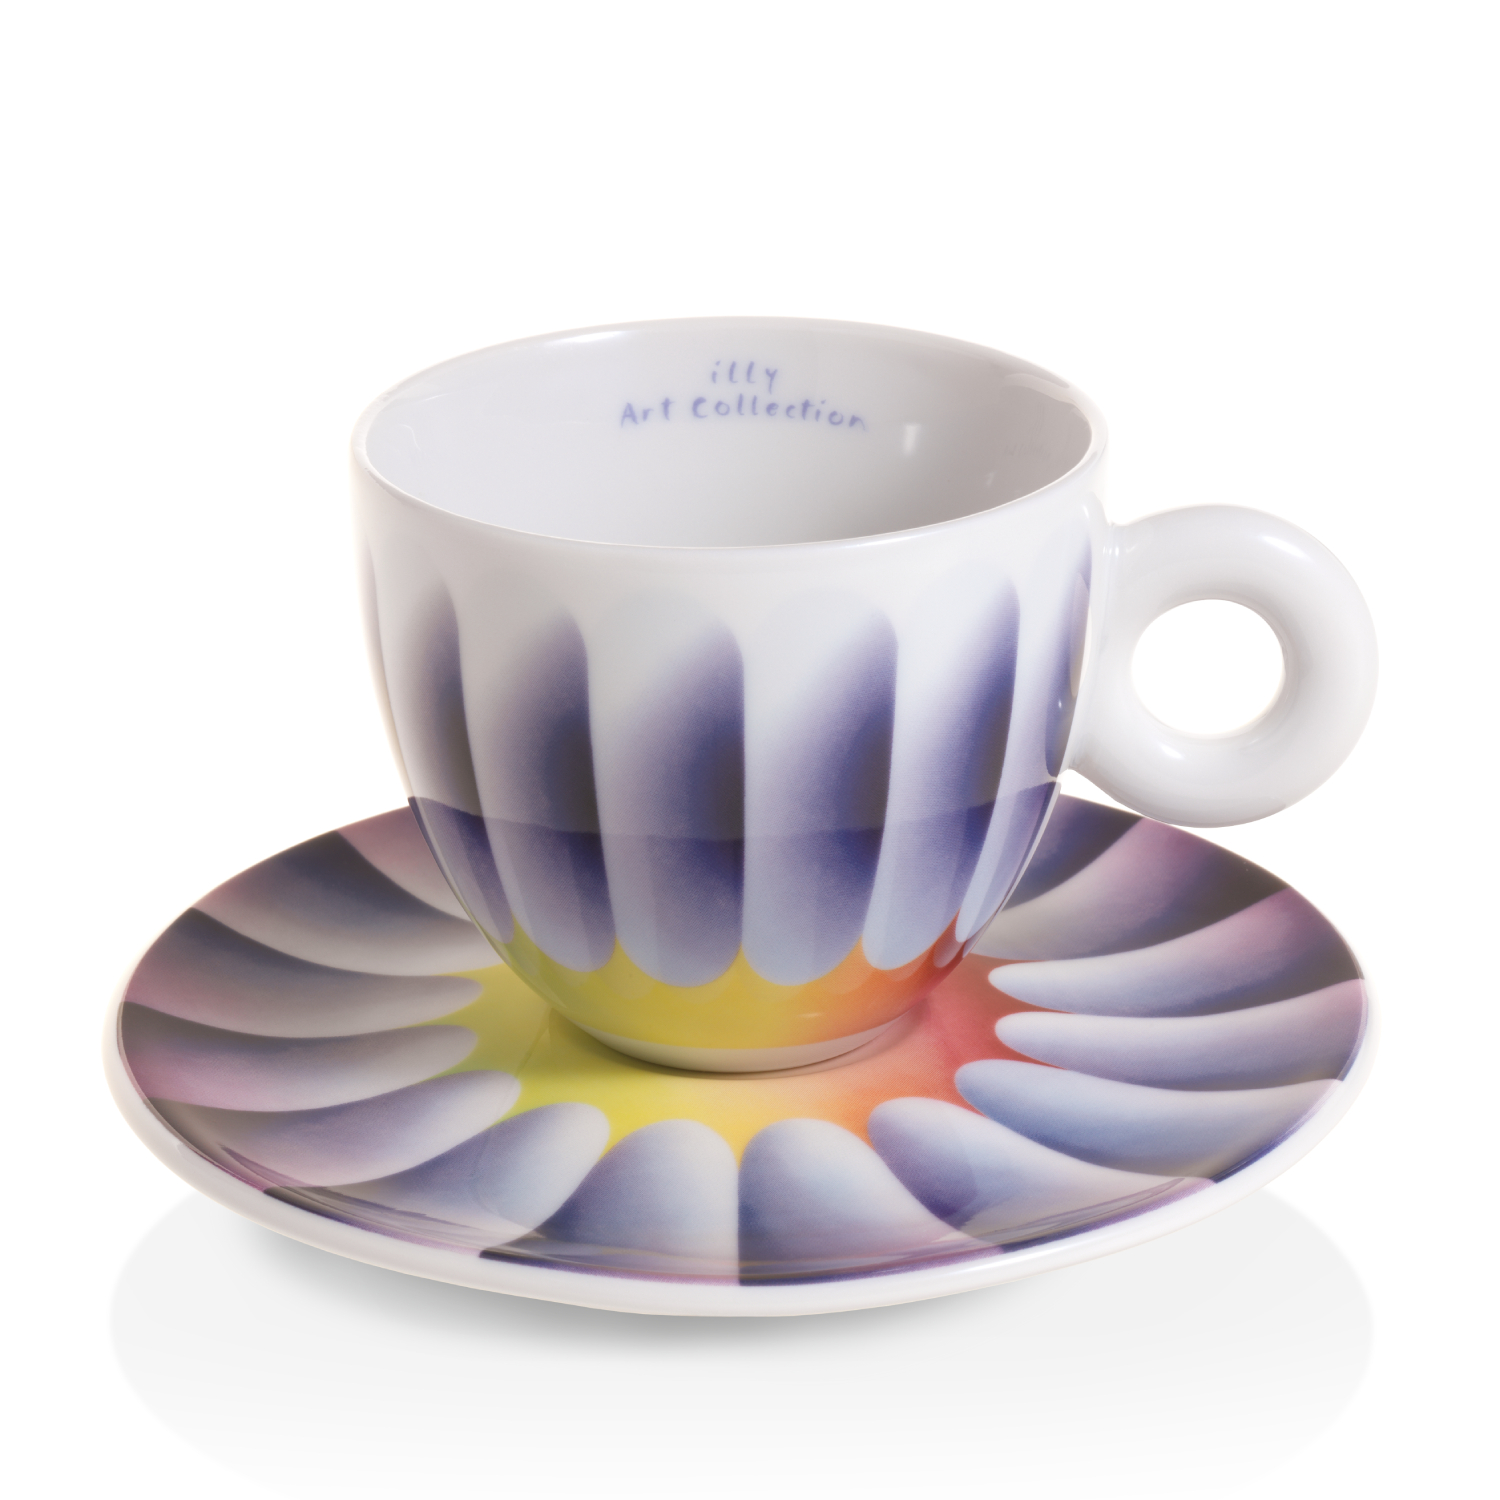 illy Art Collection JUDY CHICAGO Σετ Δώρου 2 Cappuccino Cups, Φλιτζάνια , 02-02-2016